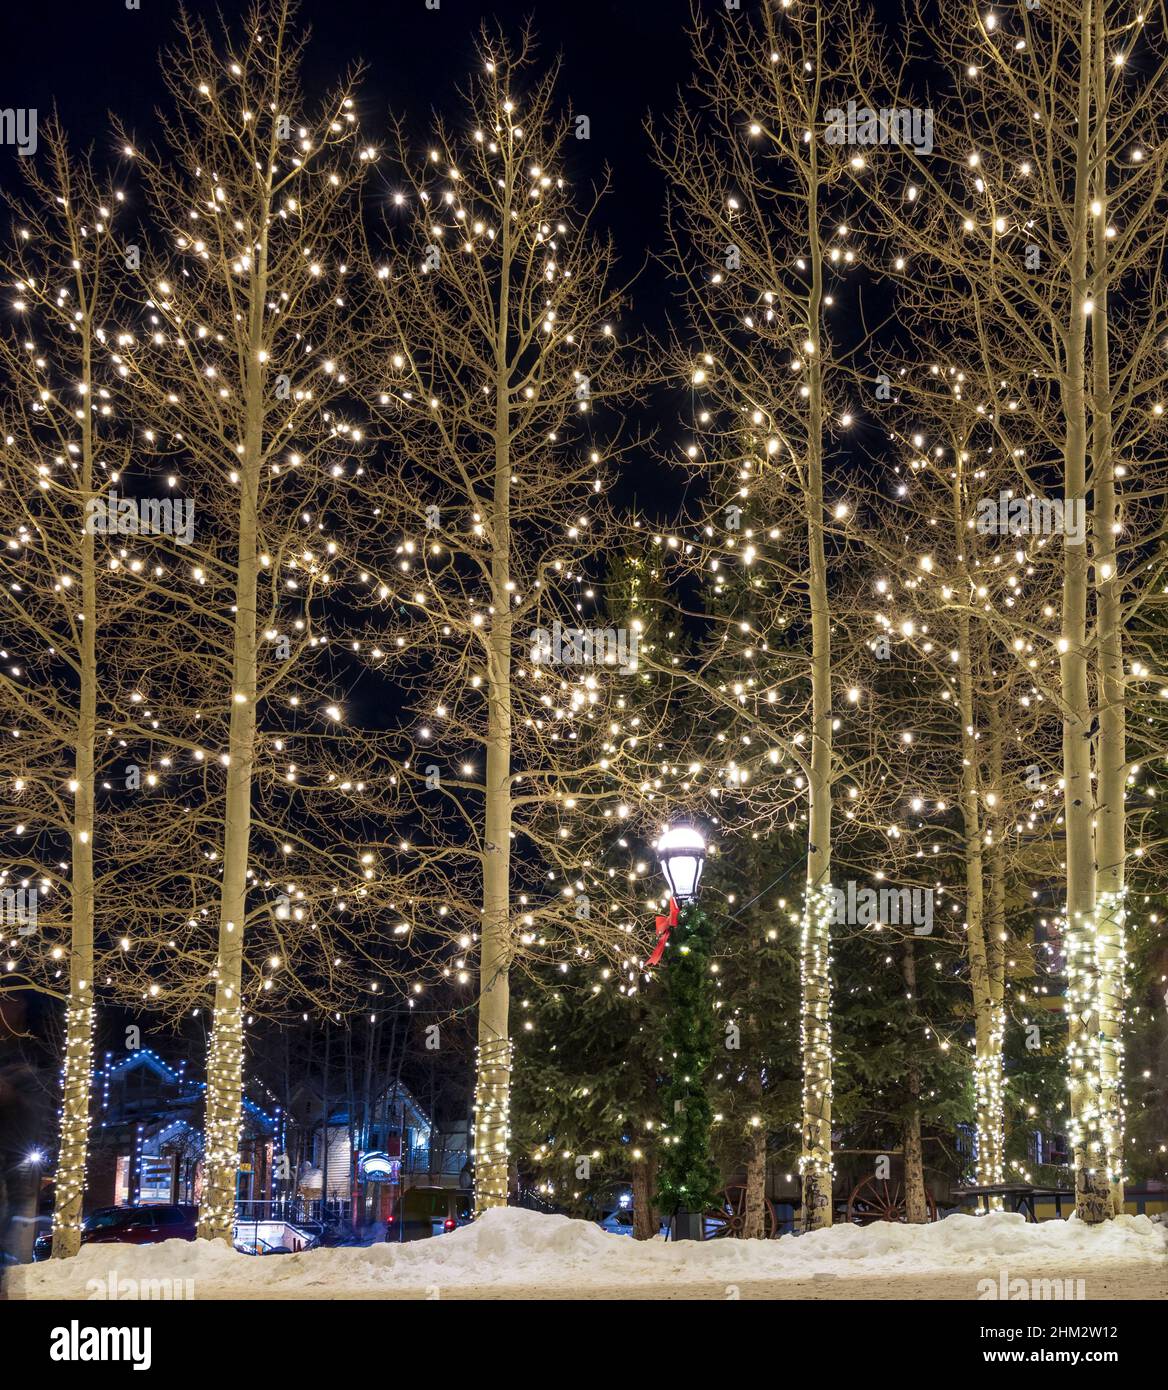 Breckenridge, Colorado. Trees in Downtown at night in the winter with ...